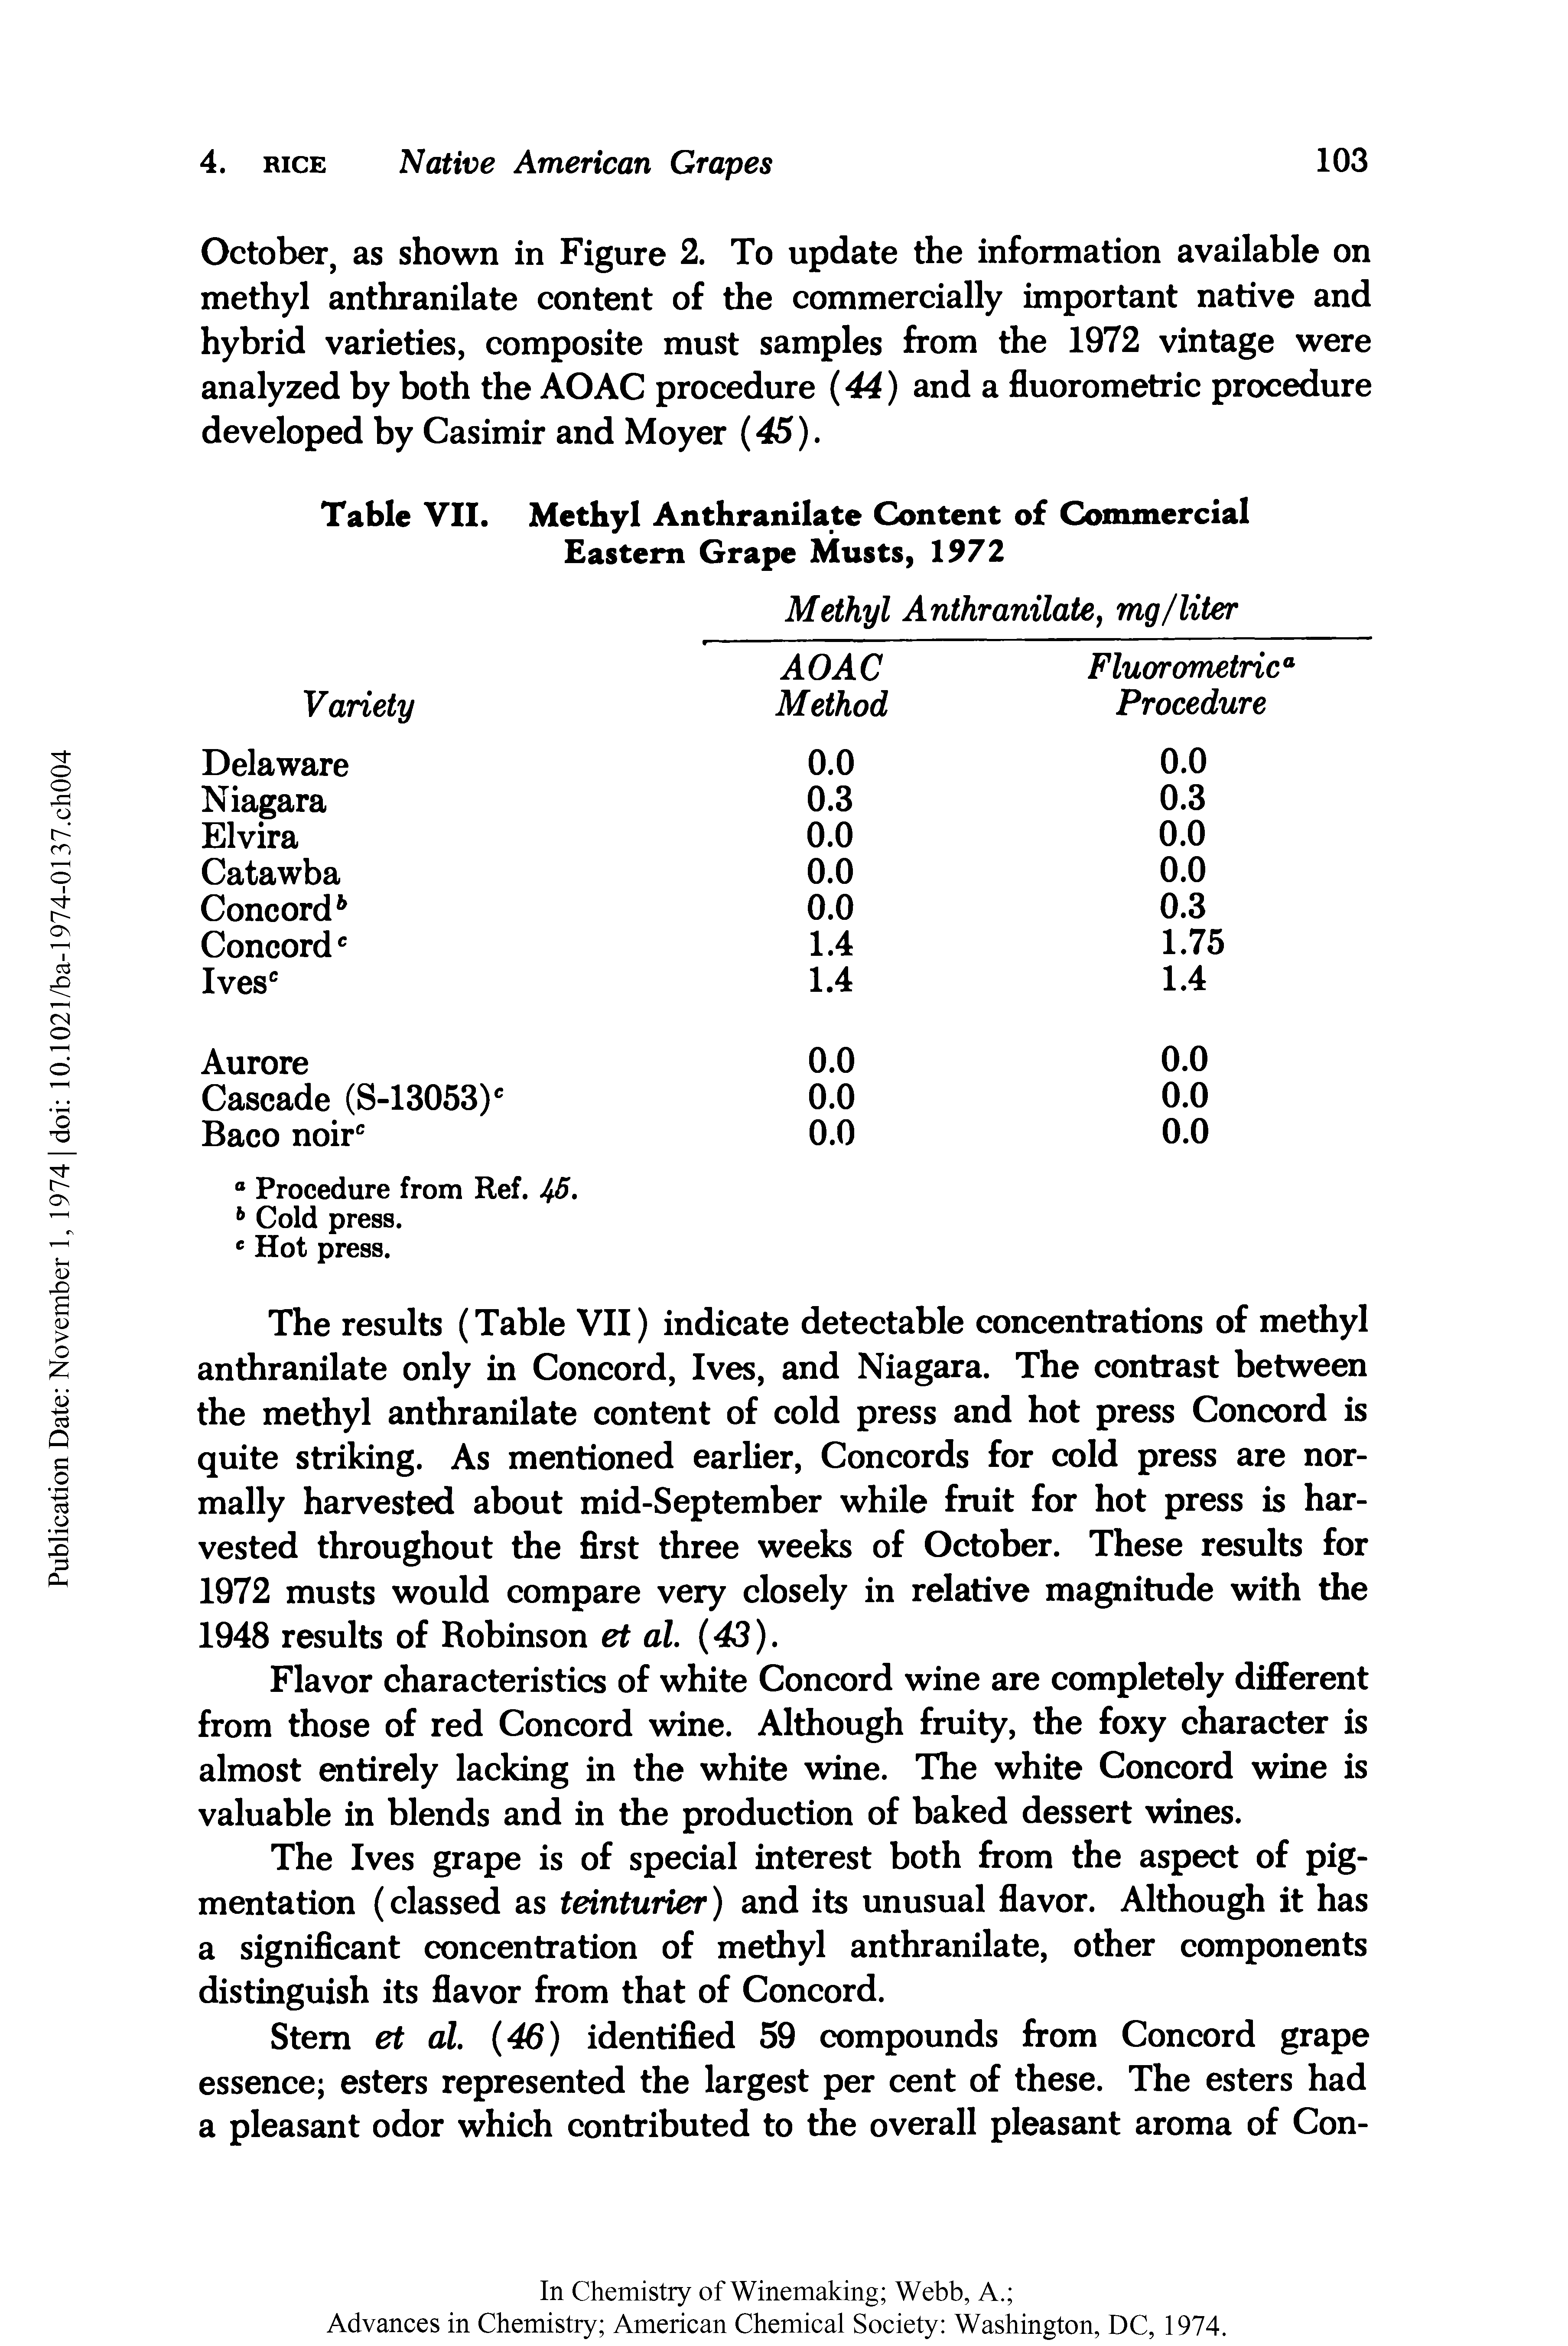 Table VII. Methyl Anthranilate Content of Commercial Eastern Grape Musts, 1972...